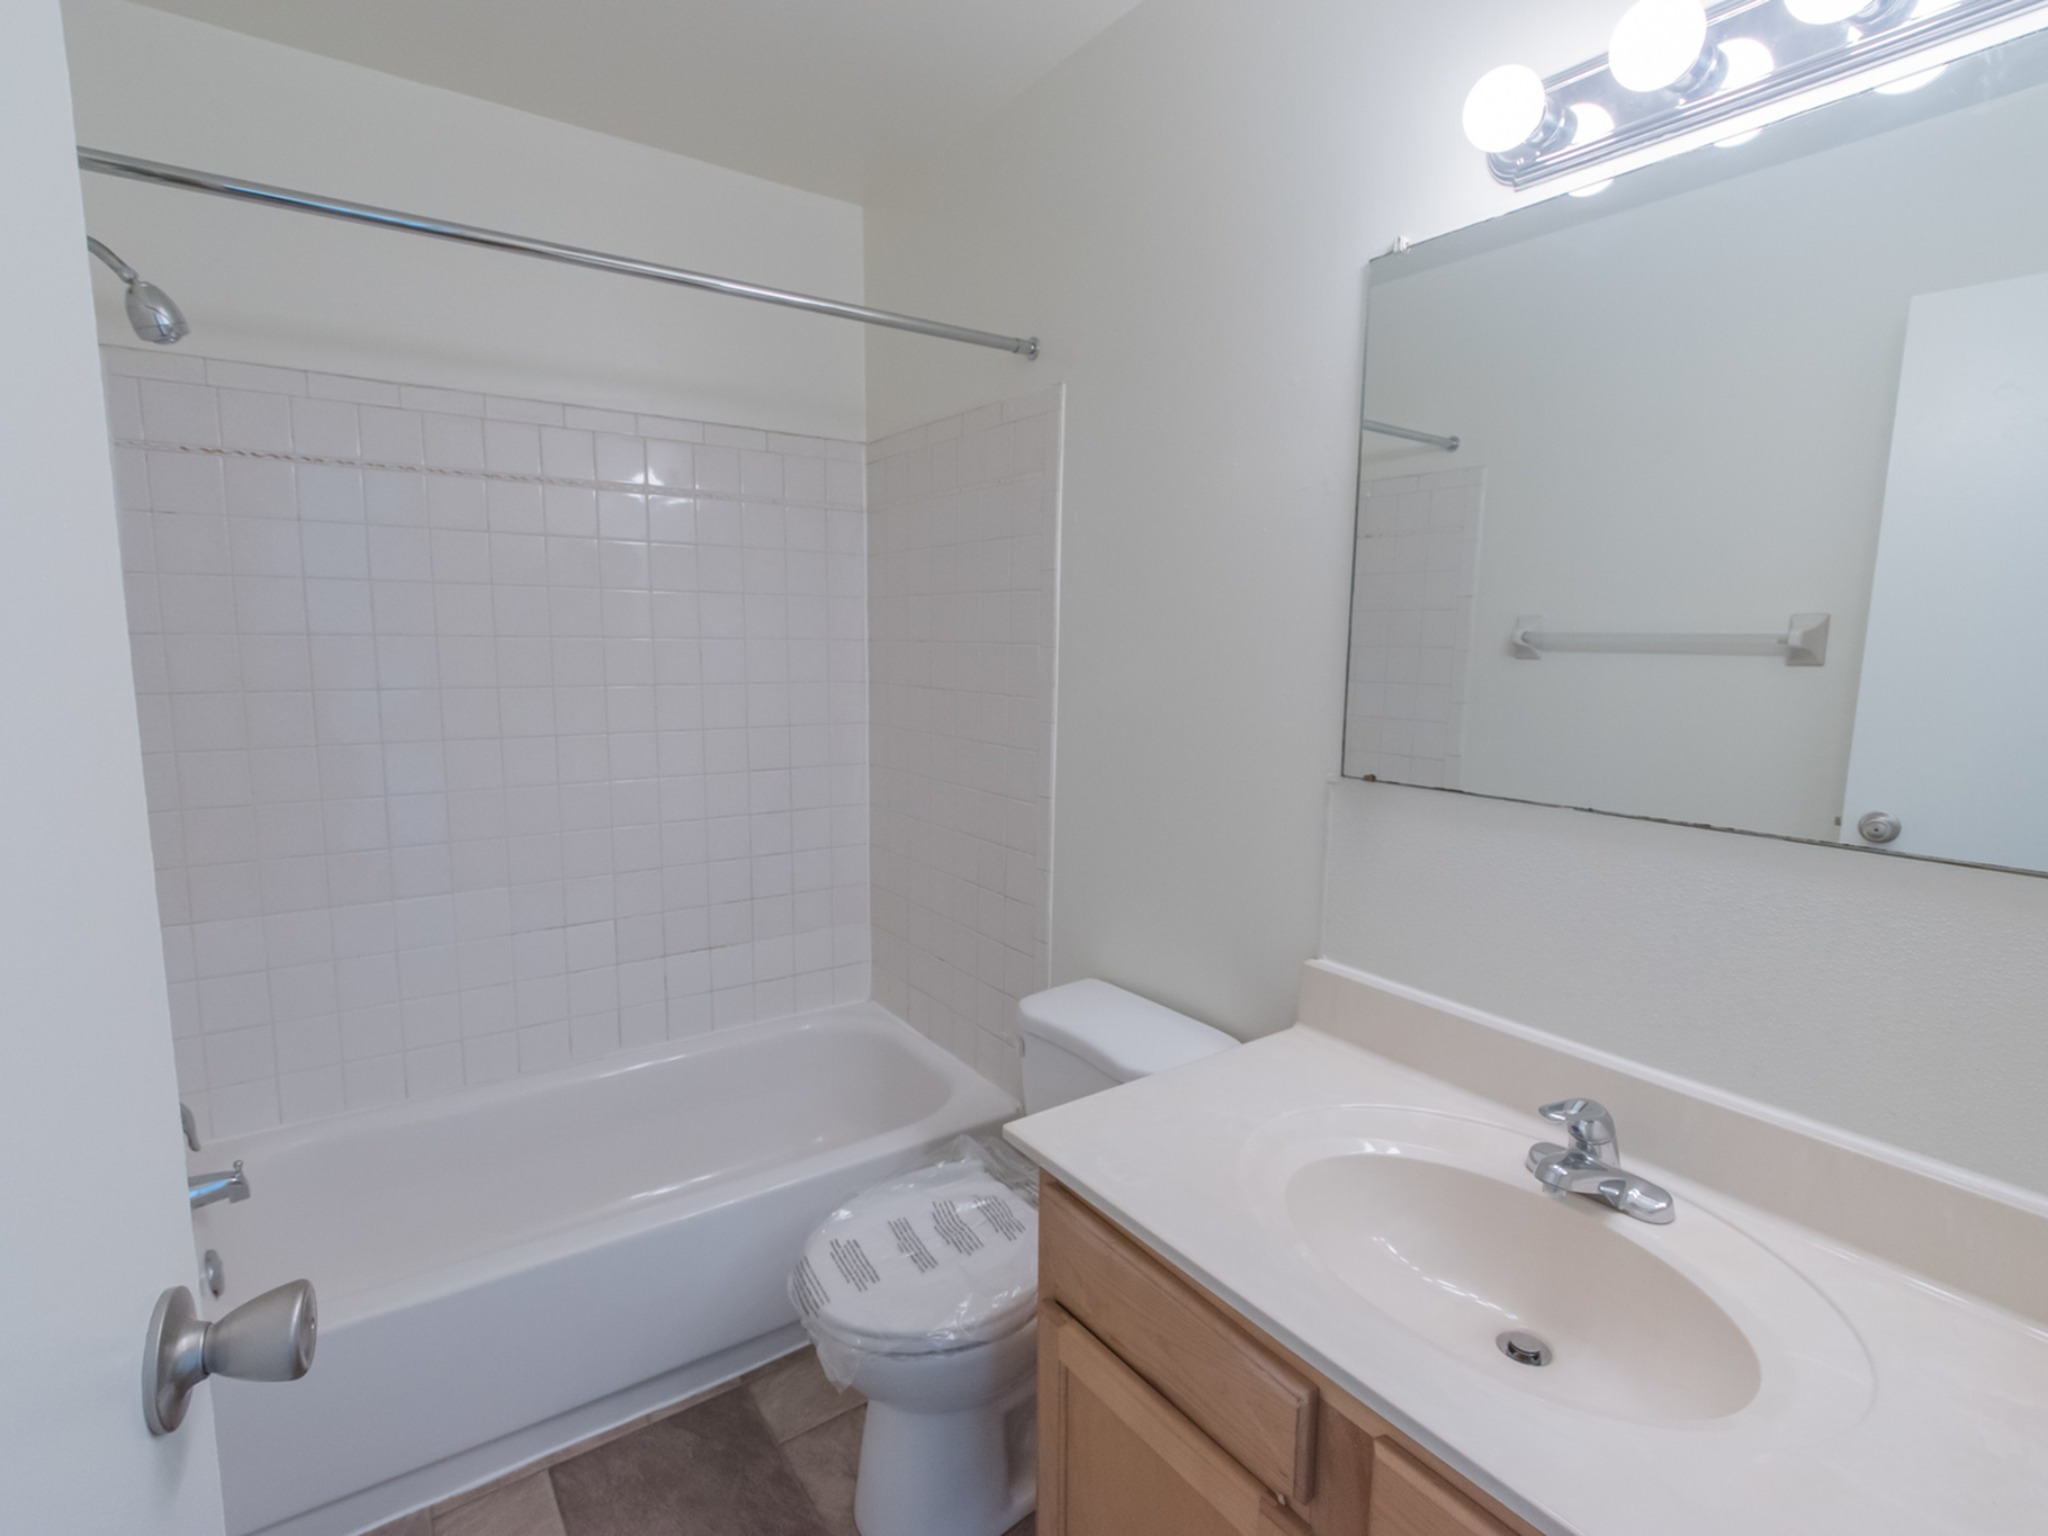 The bathroom area of an apartment, fitted with a single vanity , a mirror, a toilet, and a shower